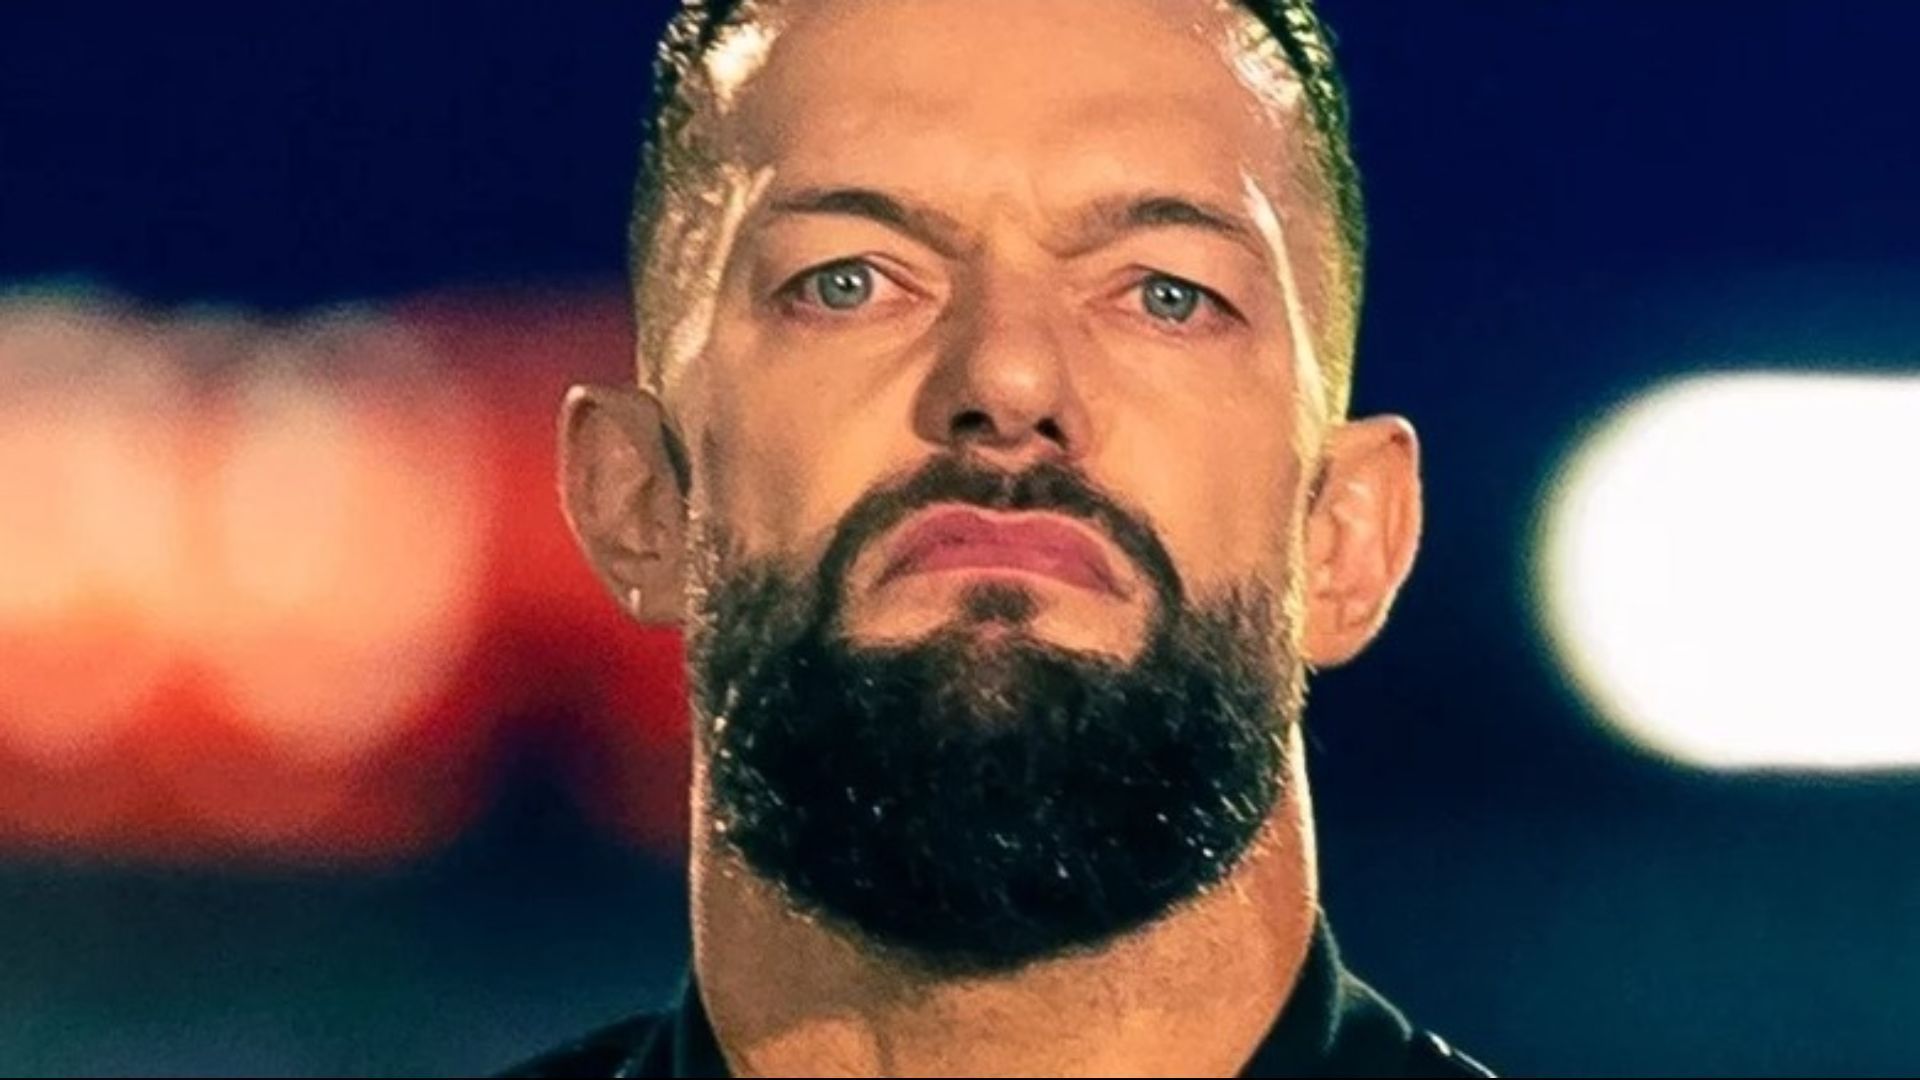 Finn Balor is one-half of the Undisputed WWE Tag Team Champion